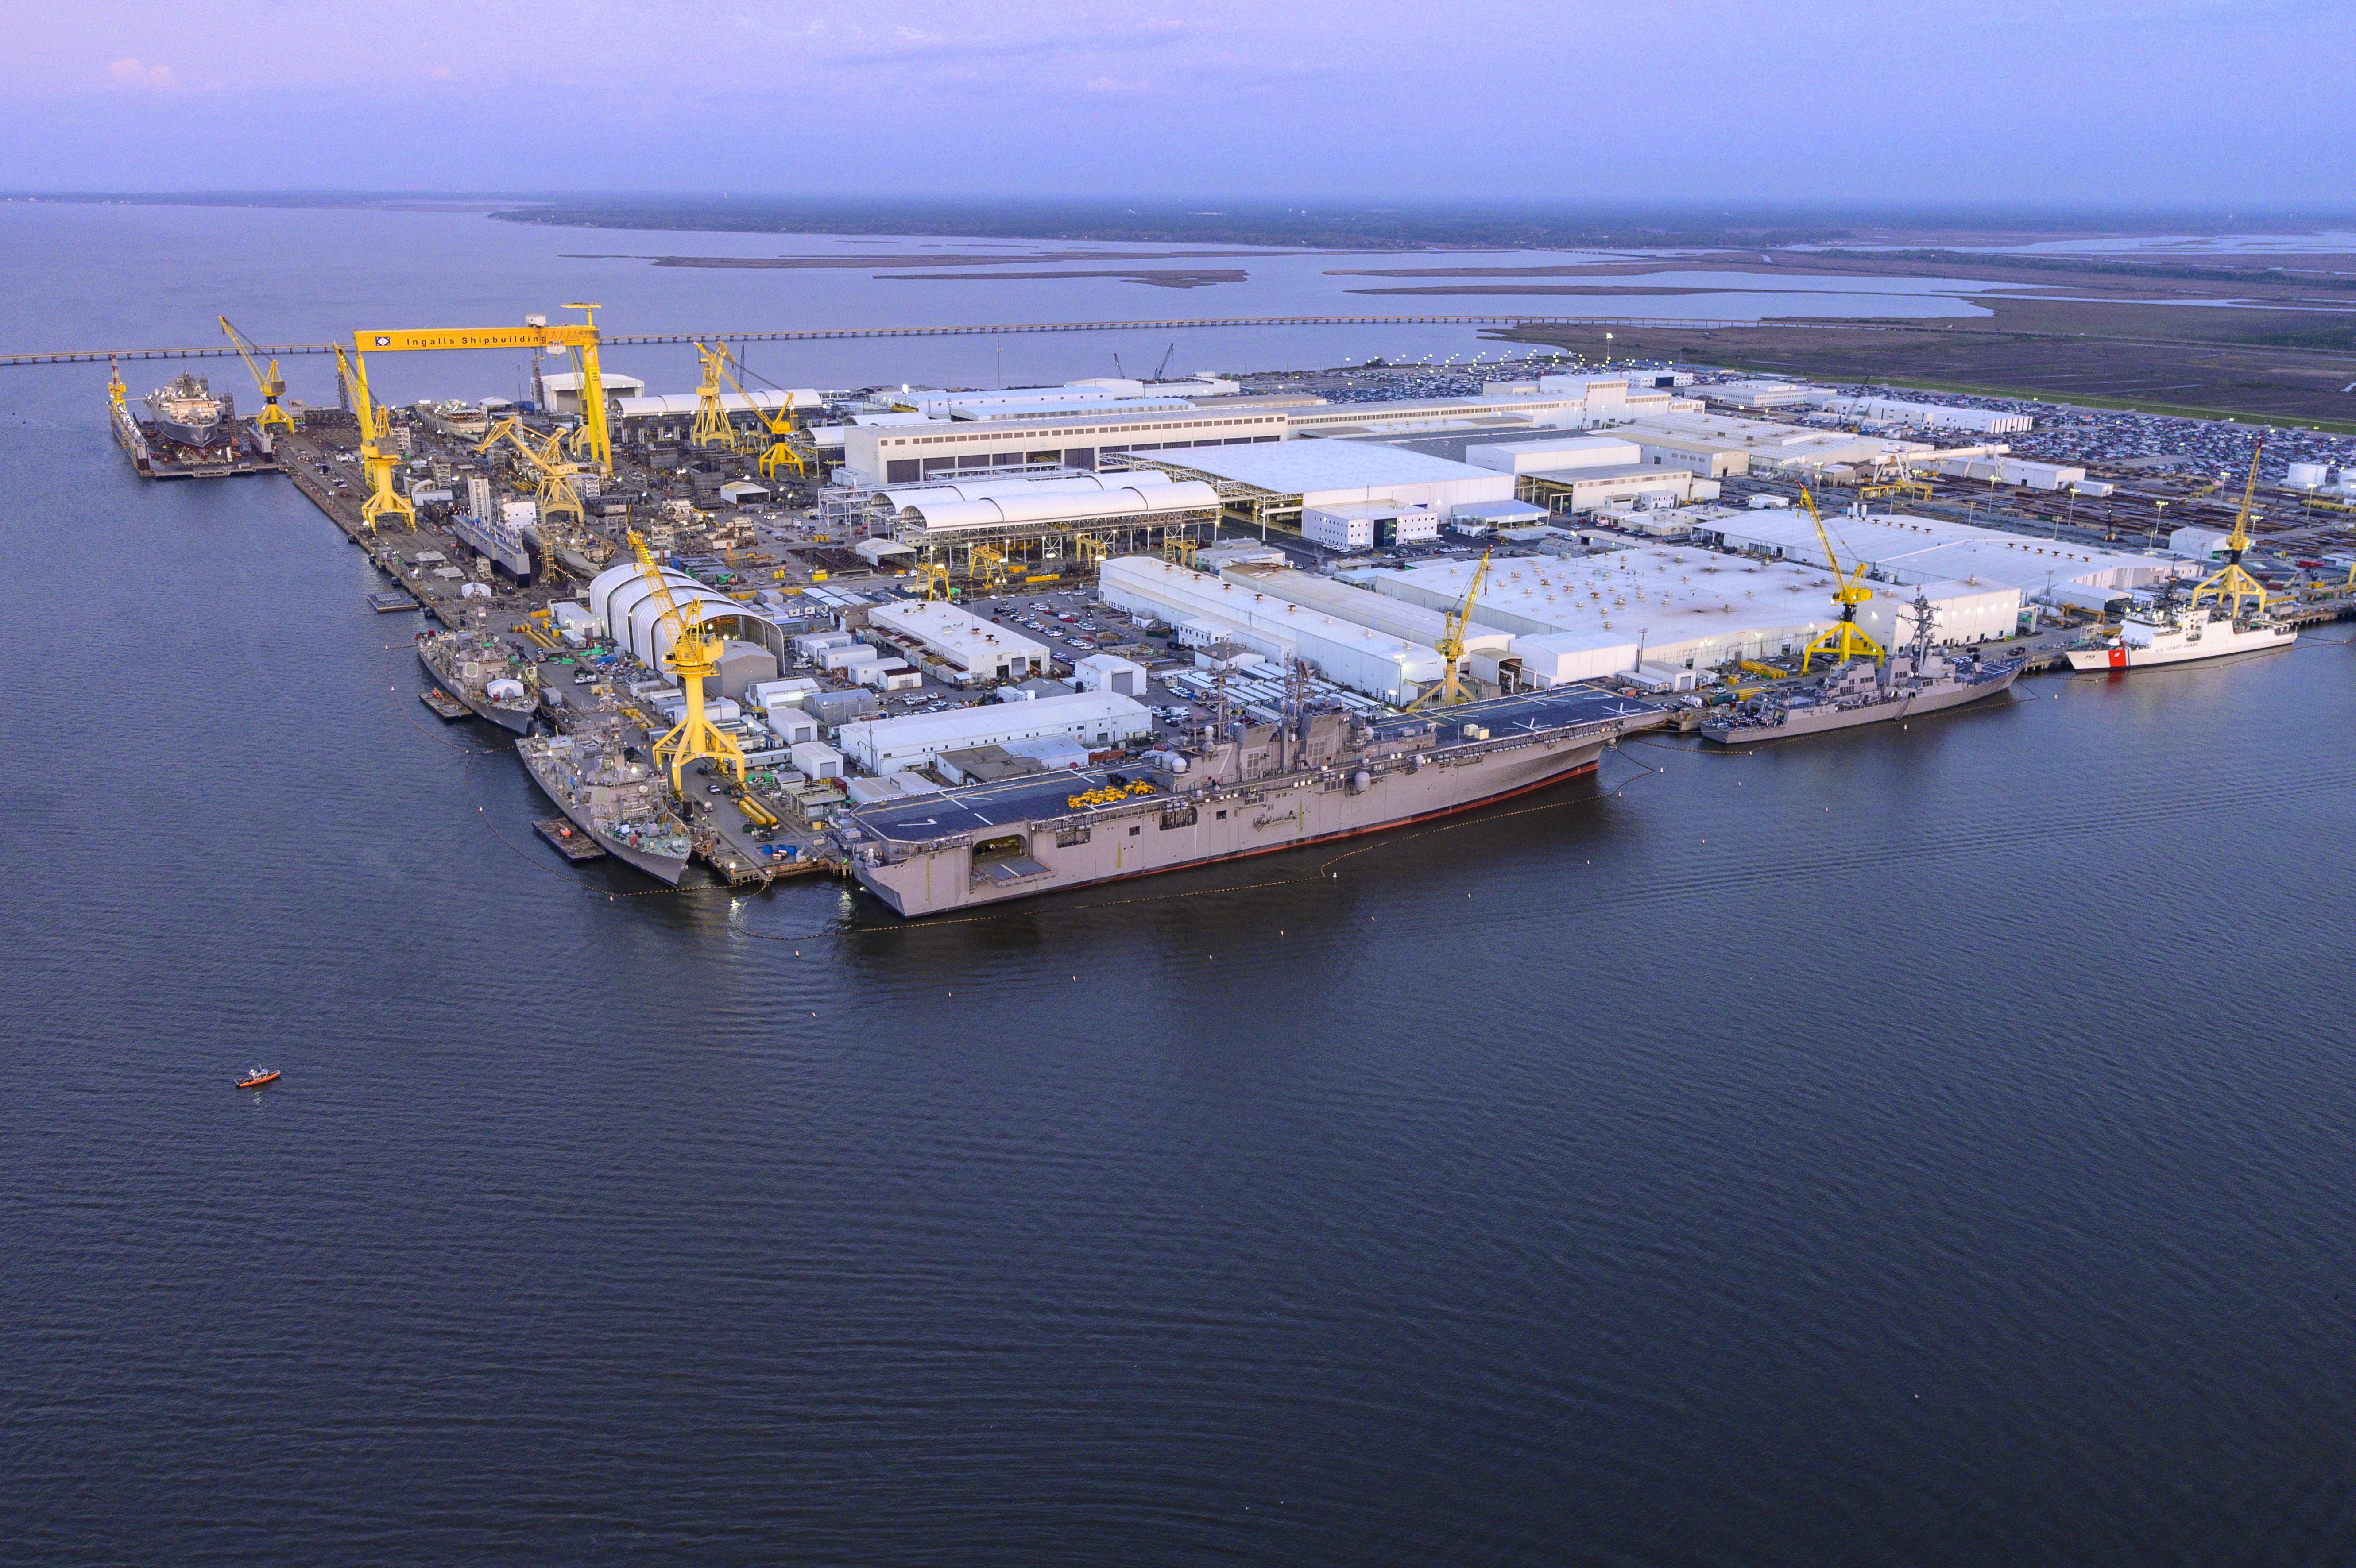 Aerial image of HII’s Ingalls Shipbuilding. Ingalls was awarded a design engineering contract from the Navy for the Next-Generation Guided-Missile Destroyer (DDG(X)) program. Ingalls has delivered 33 destroyers to the U.S. navy, with five more currently under construction. Ingalls is working with the Navy to keep the destroyer line strong as the Navy transitions to the next generation of guided missile destroyers.